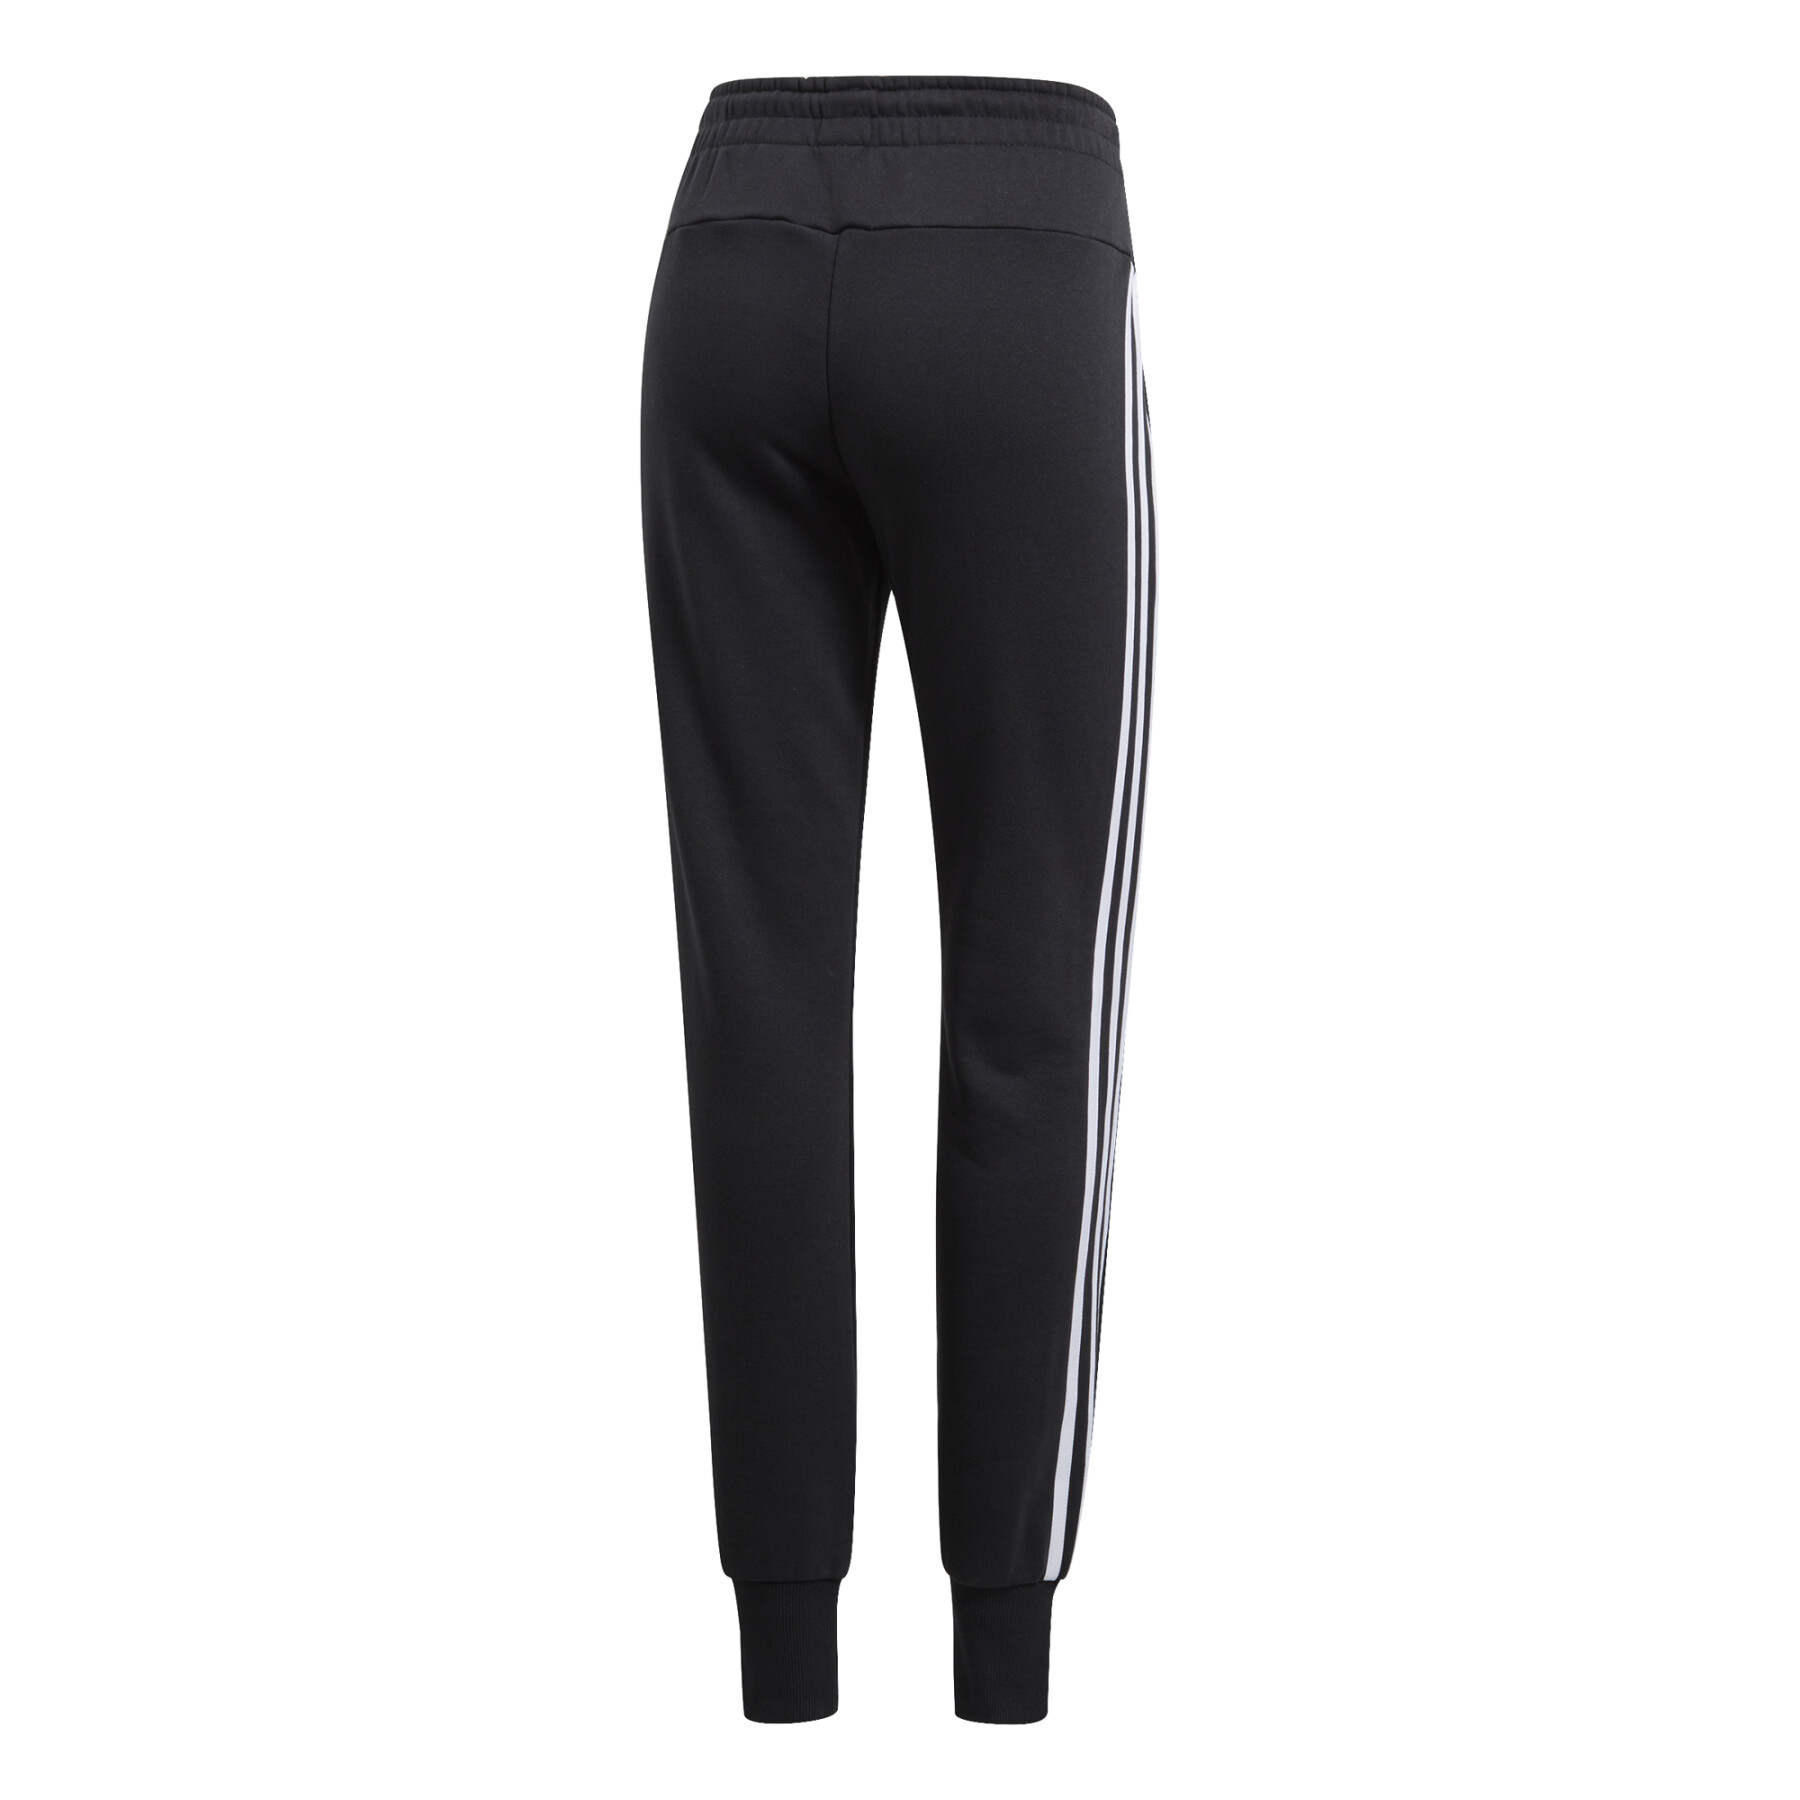 Women's pants adidas Must Haves 3-Stripes French Terry